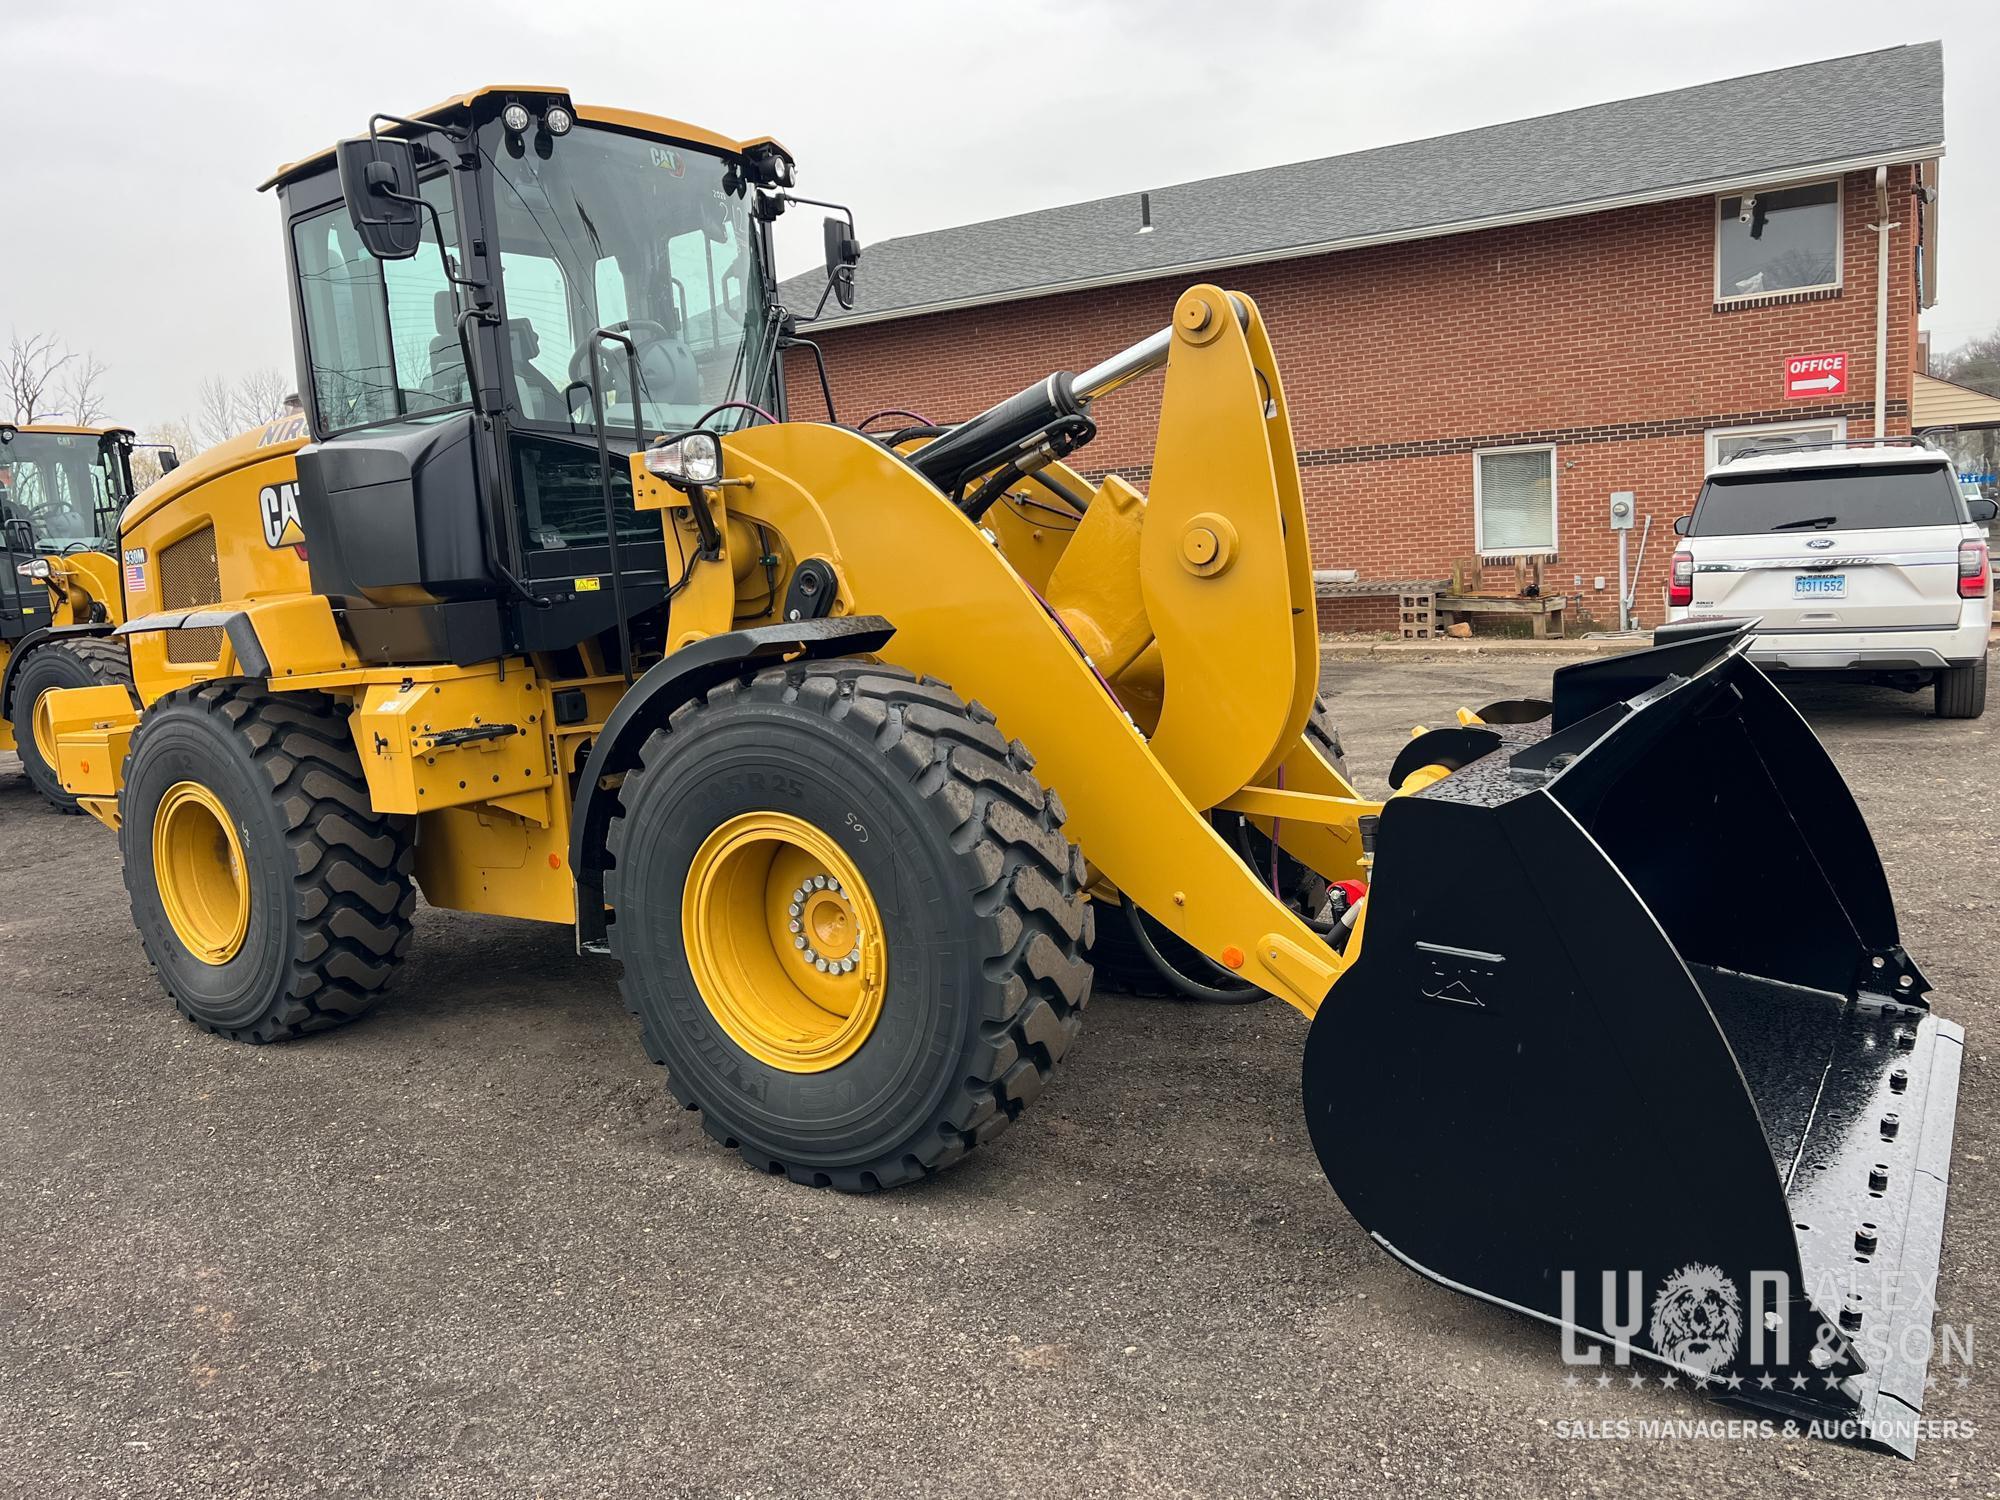 2023 CAT 930M RUBBER TIRED LOADER SN-03263......powered by Cat C7.1 diesel engine, equipped with ERO